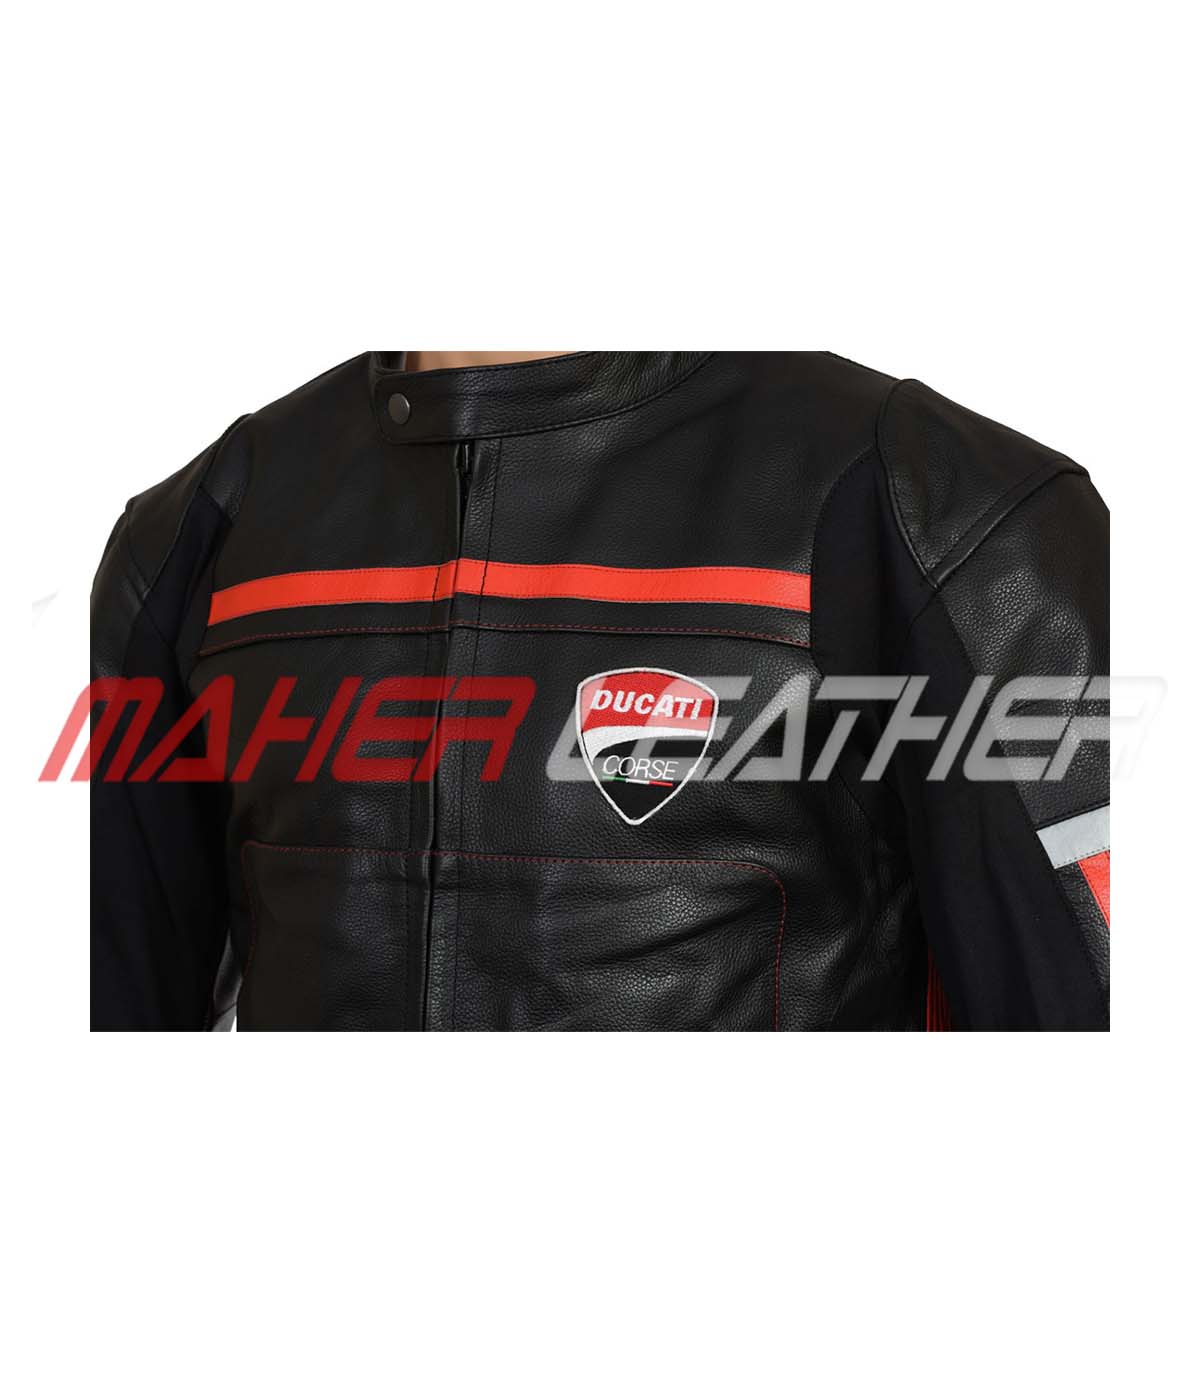 Front chest view of Ducati motorcycle jackets for sale